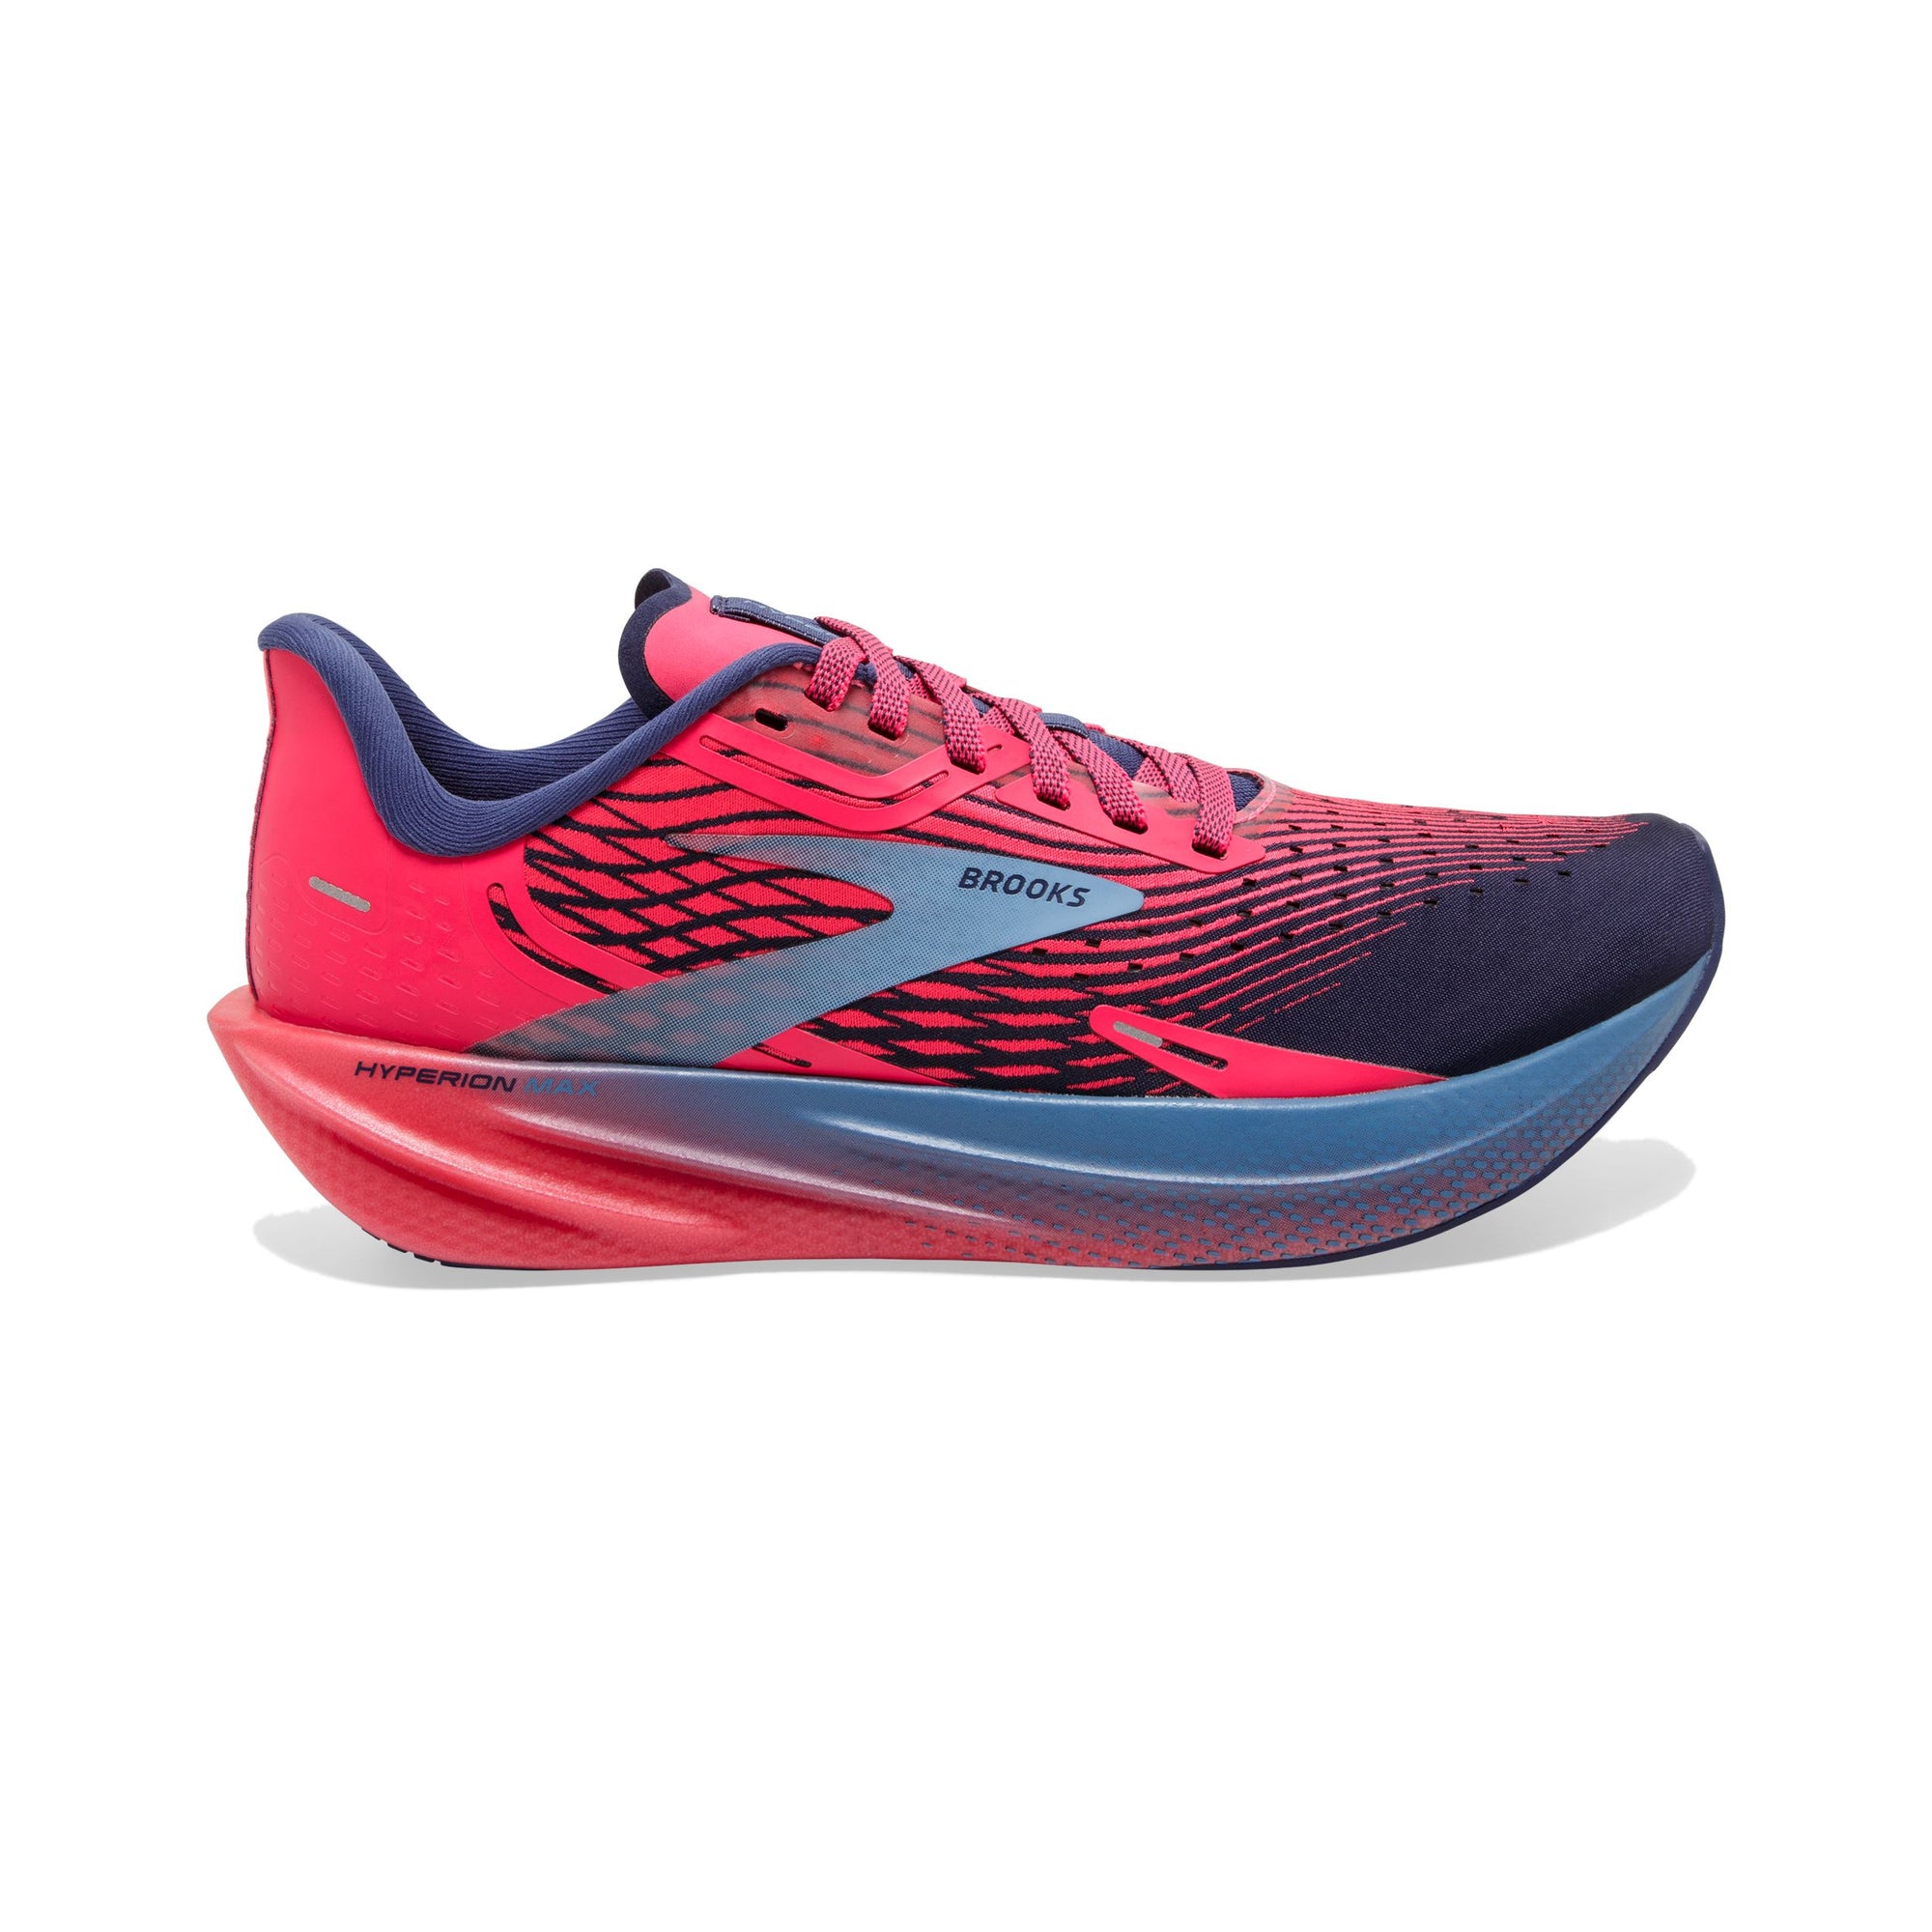 Brooks Women's Hyperion Max Road Running Shoes Pink/Cobalt/Blissful Blue US 6 